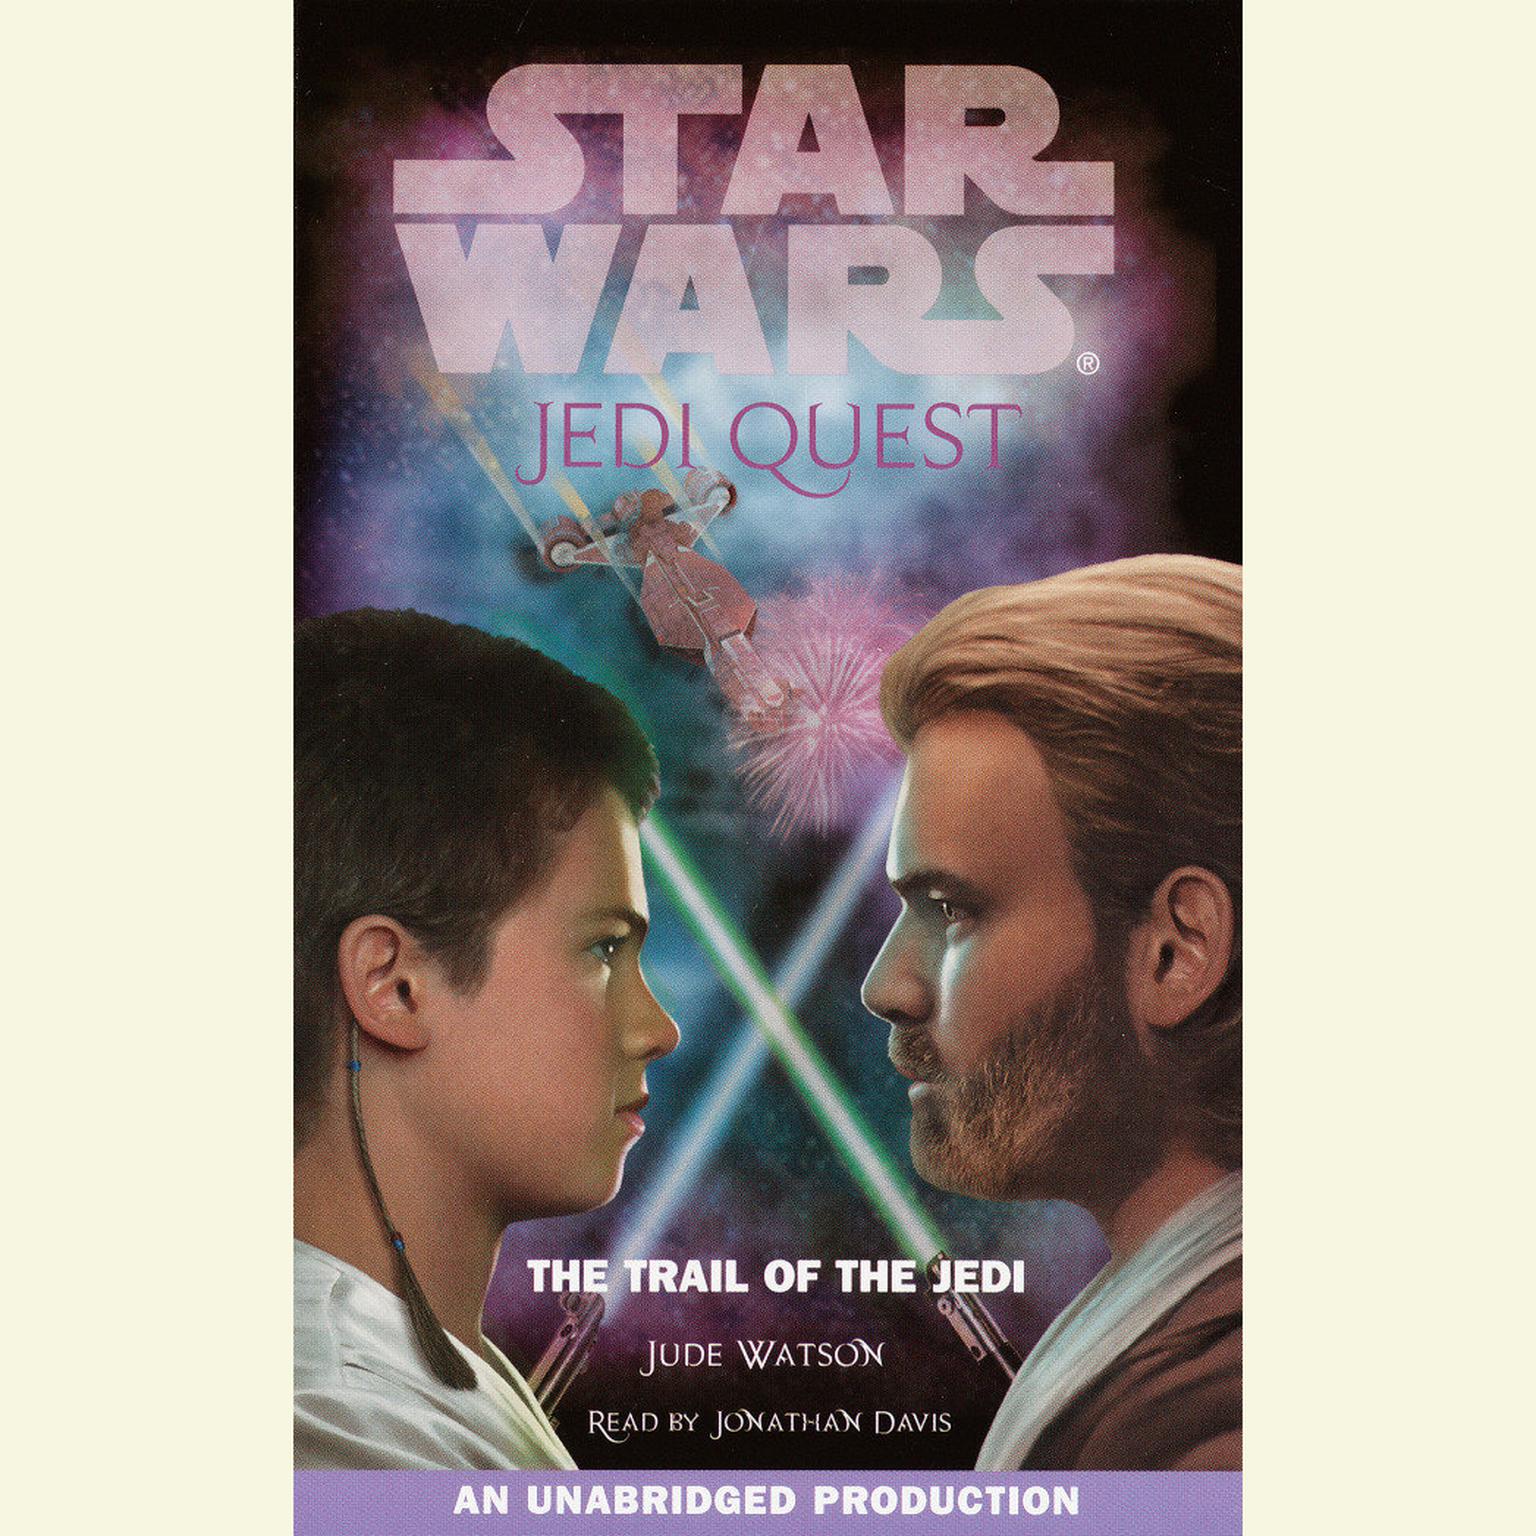 Star Wars: Jedi Quest #2: The Trail of the Jedi Audiobook, by Jude Watson